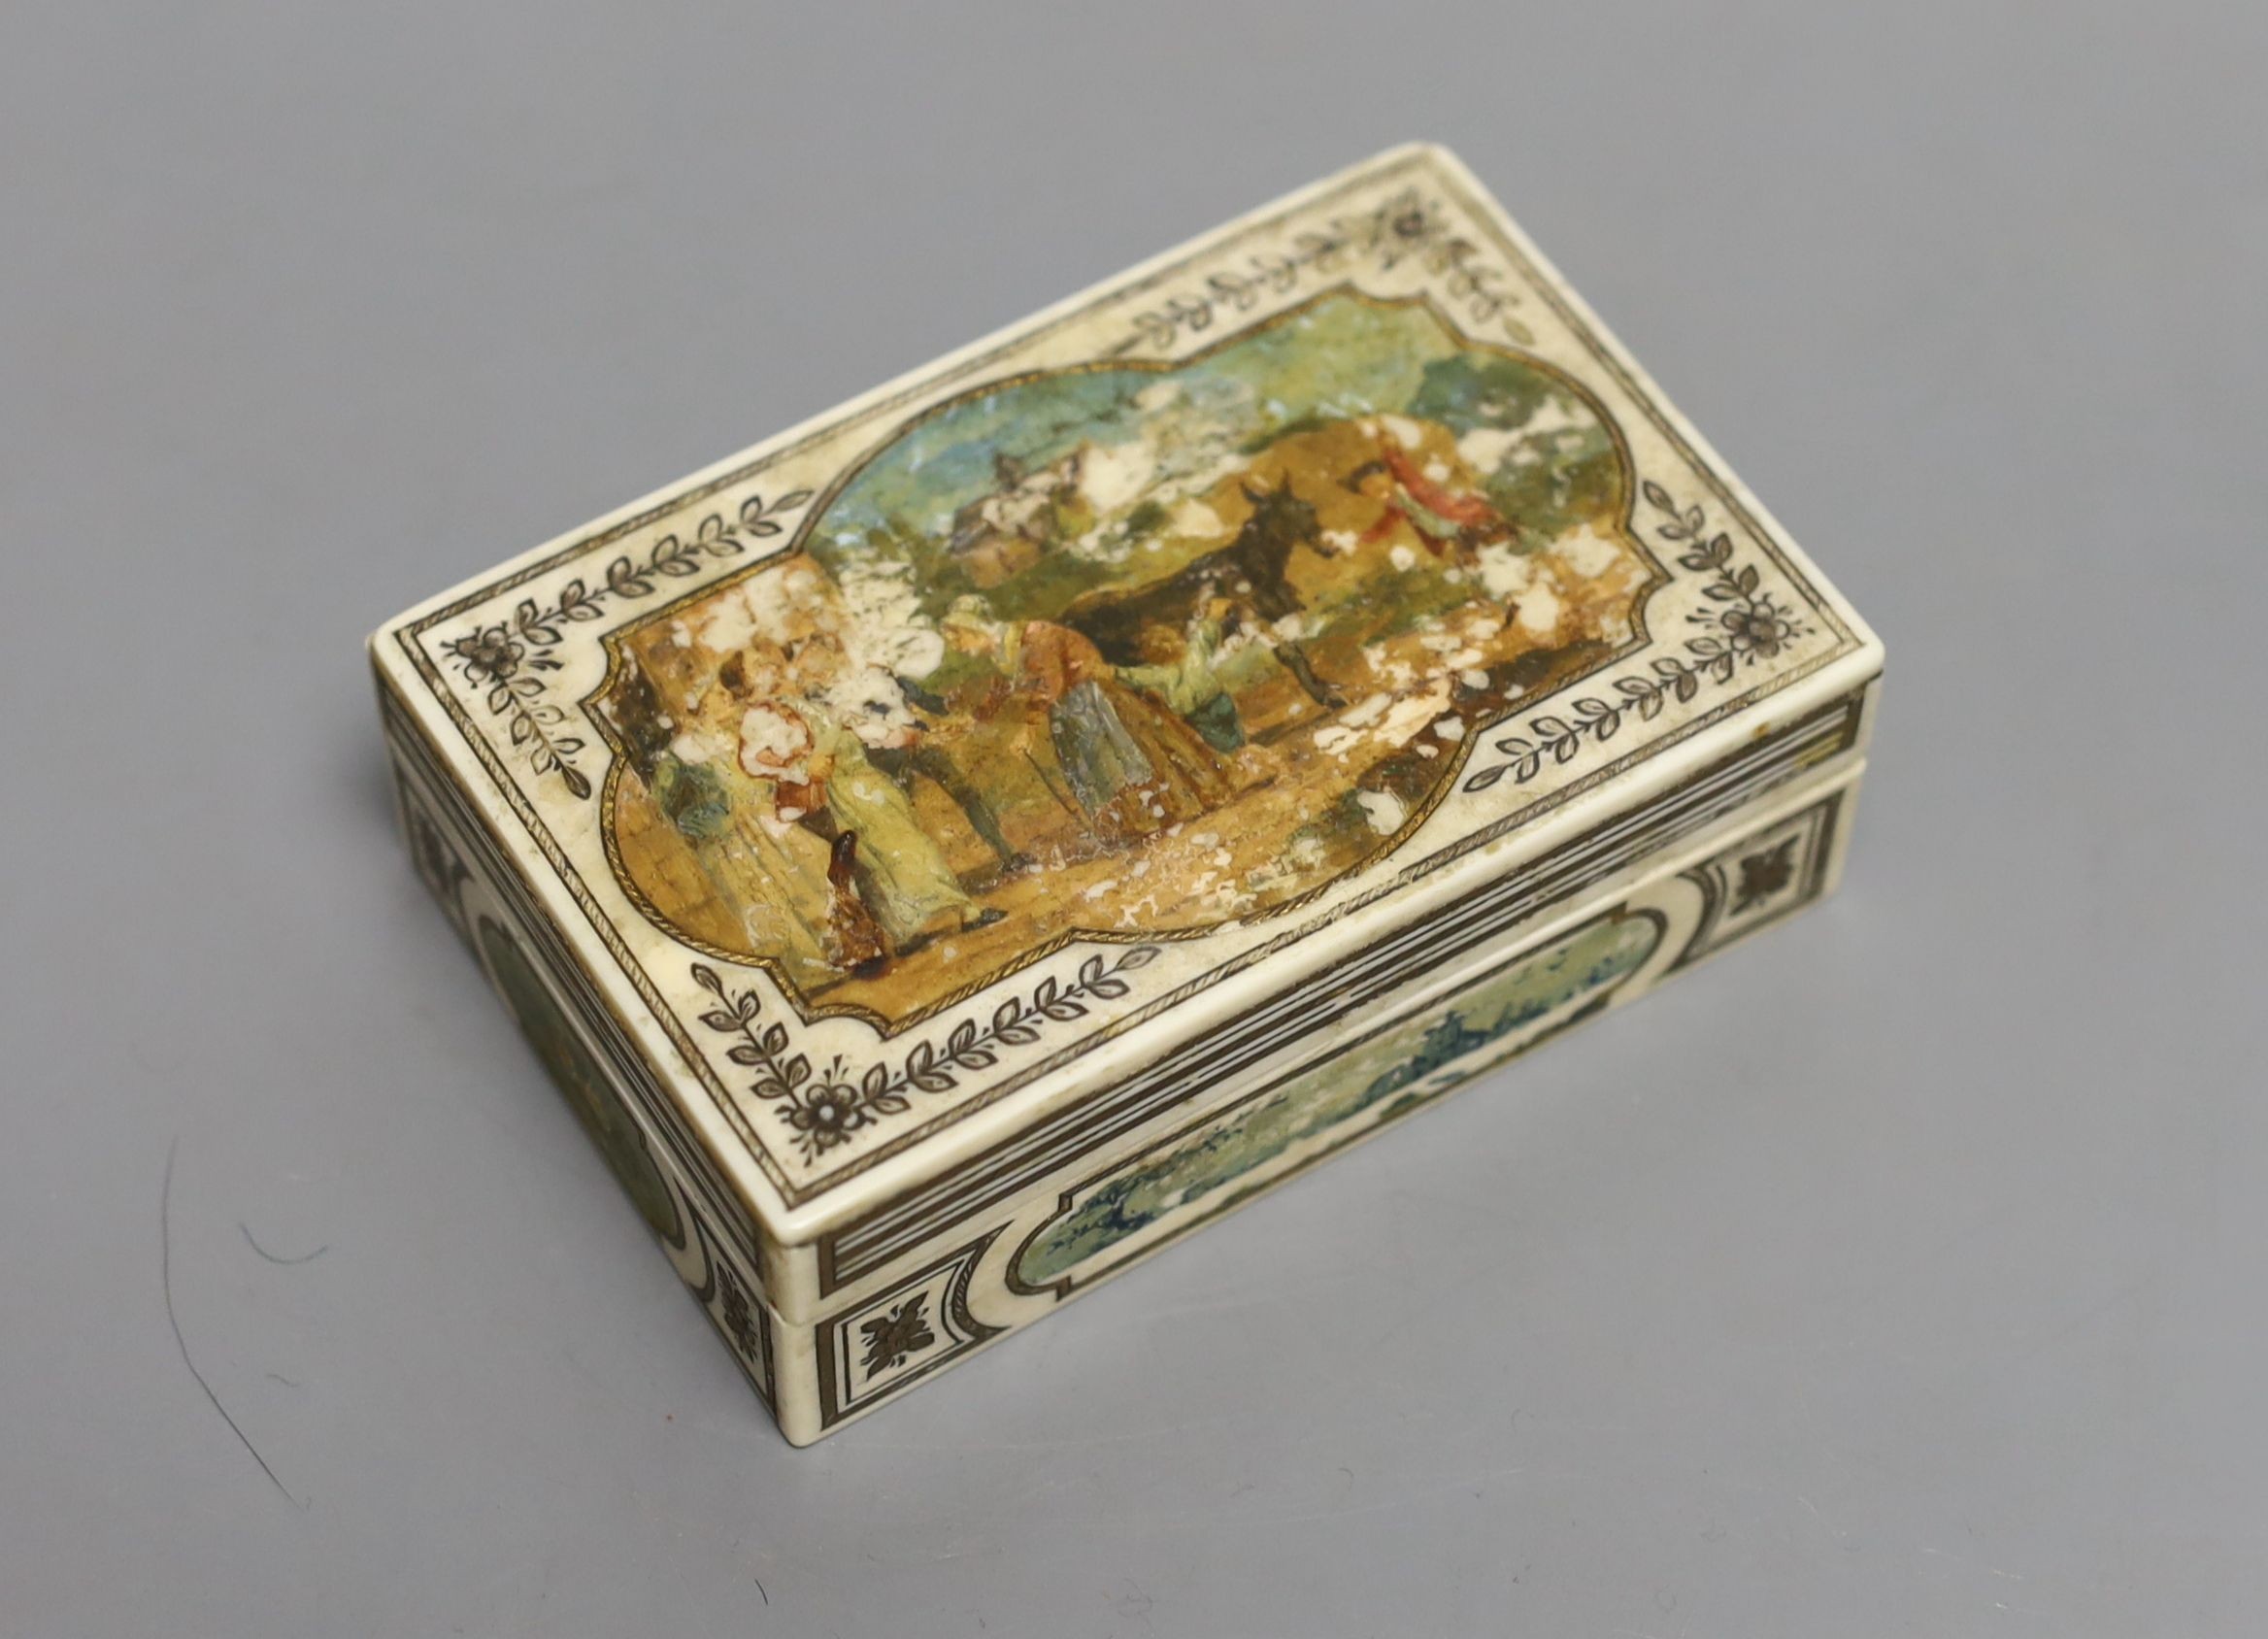 A 19th century Continental painted ivory box, mask to cap - 10cm long, 3.5cm tall